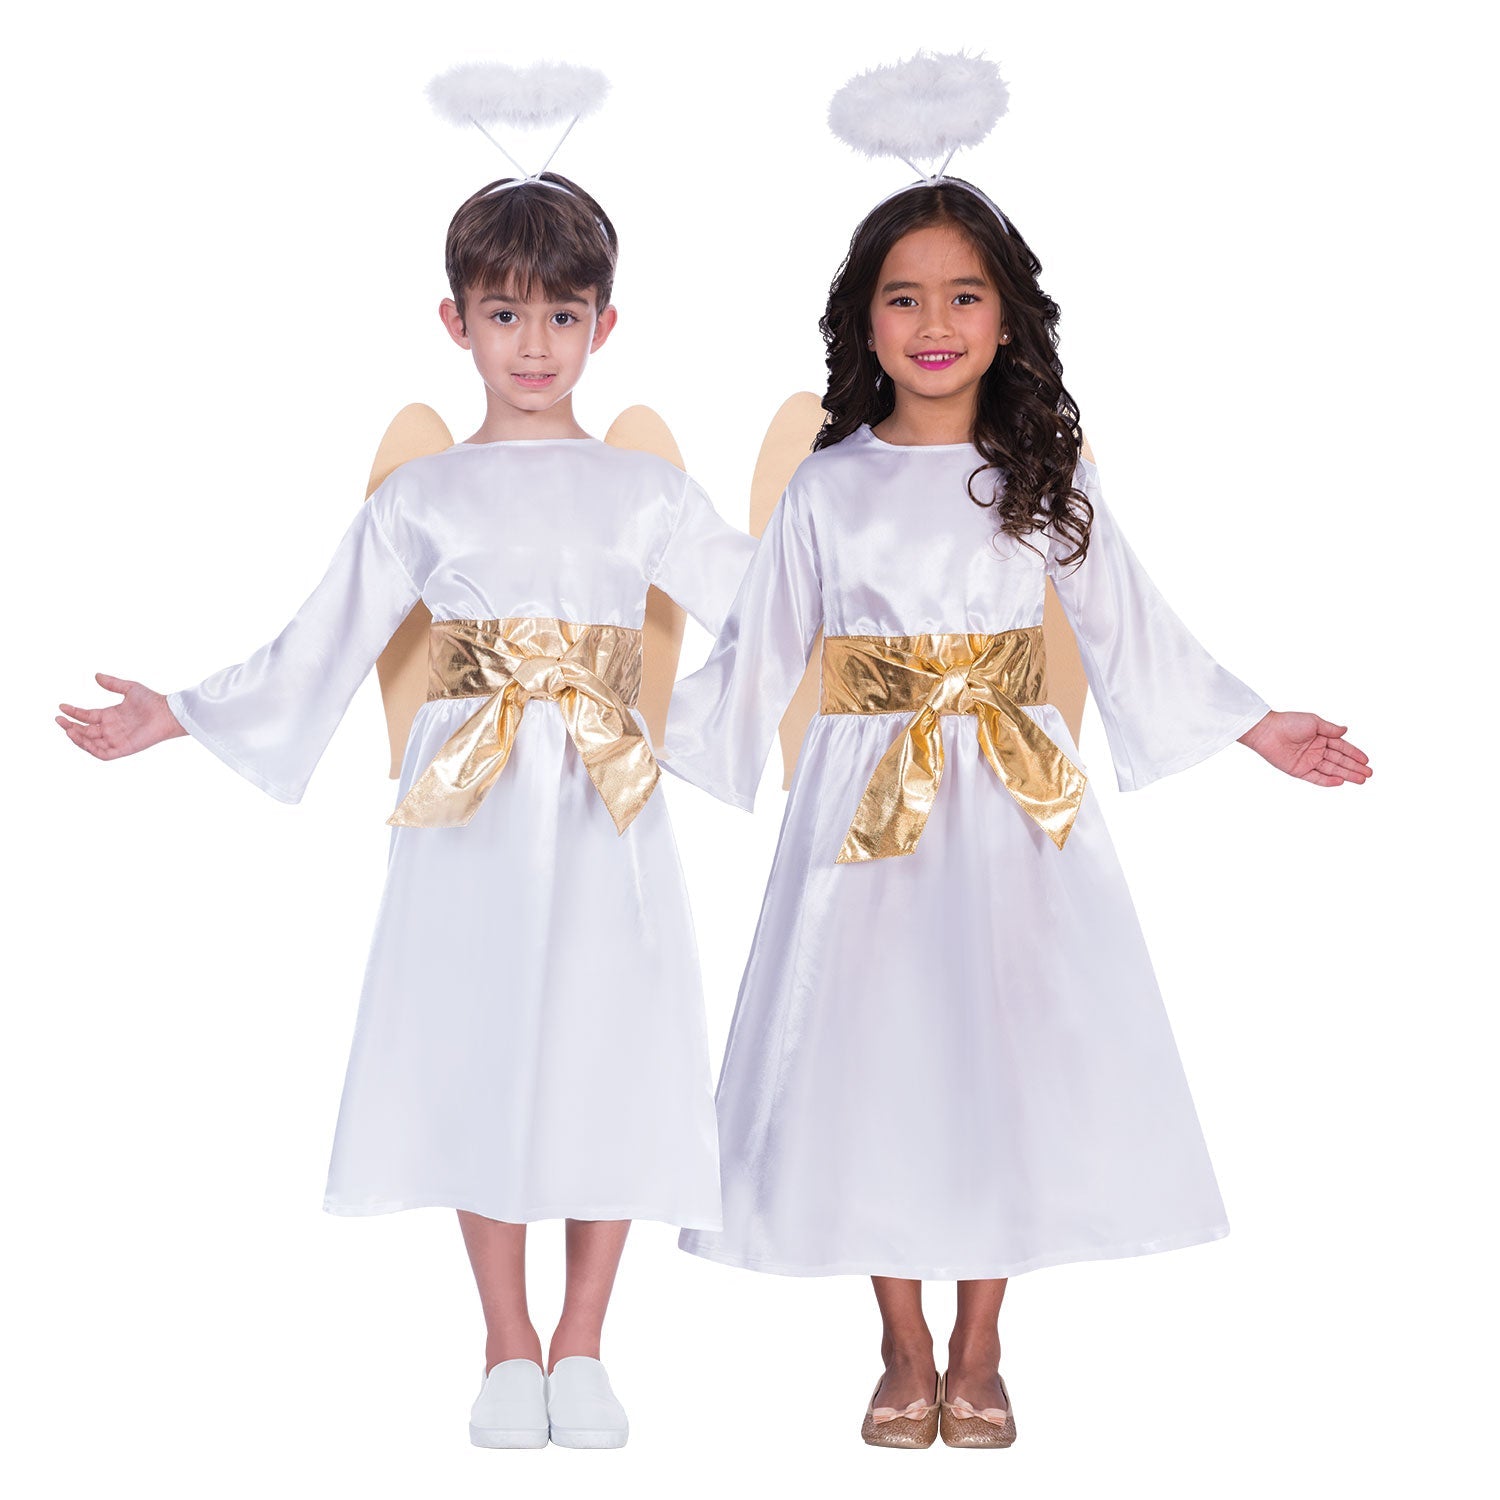 Child Nativity Gabriel Angel Costume includes tunic with gold bow belt| wings and halo